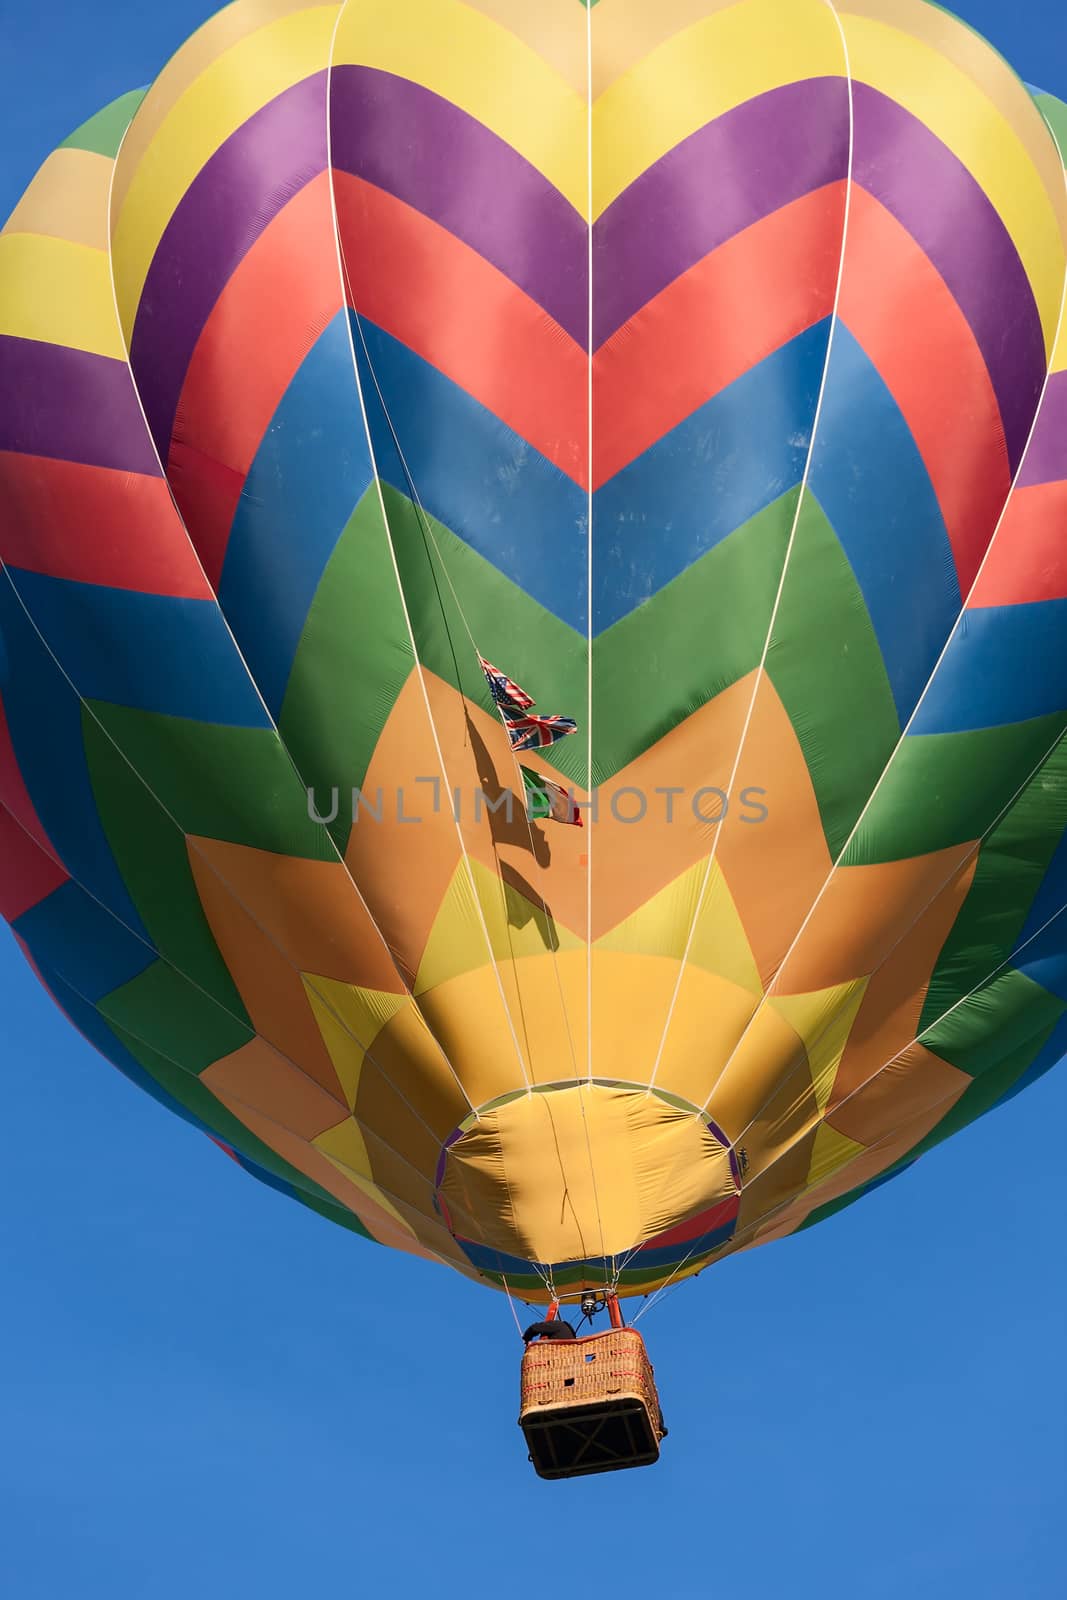 Colored hot-air balloon in flight against a blue sky